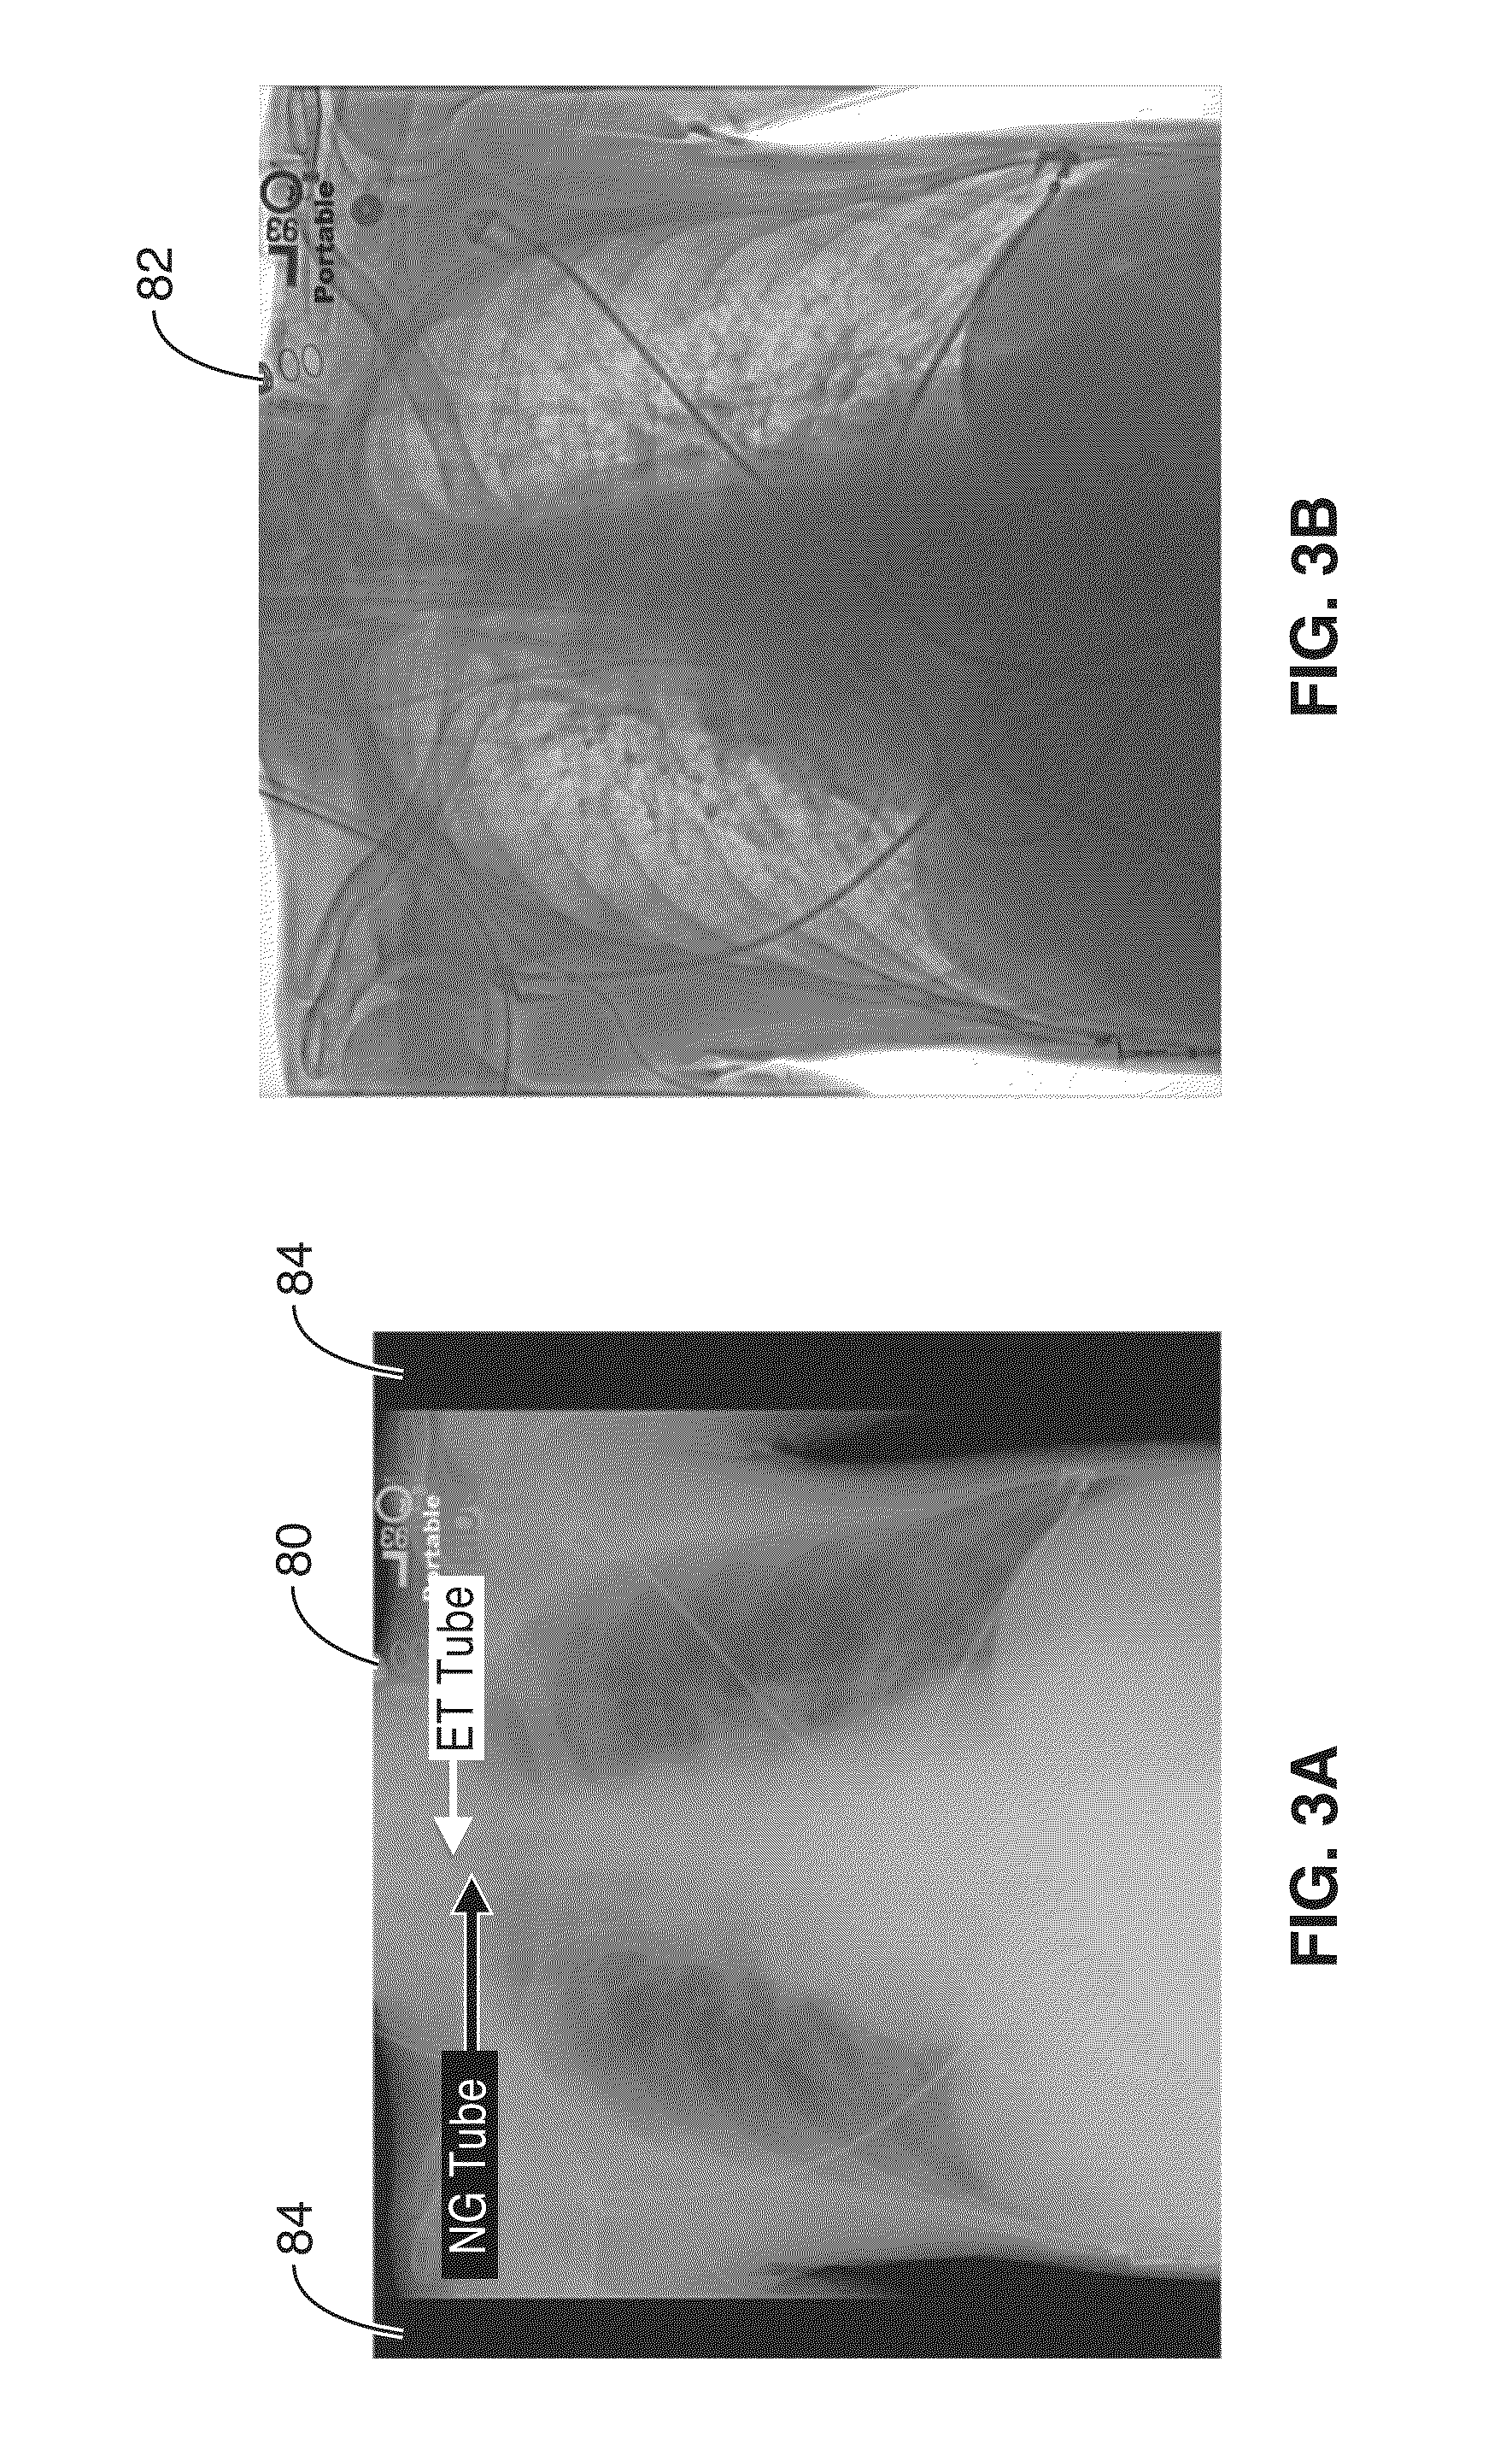 Methods and apparatus for computer-aided radiological detection and imaging